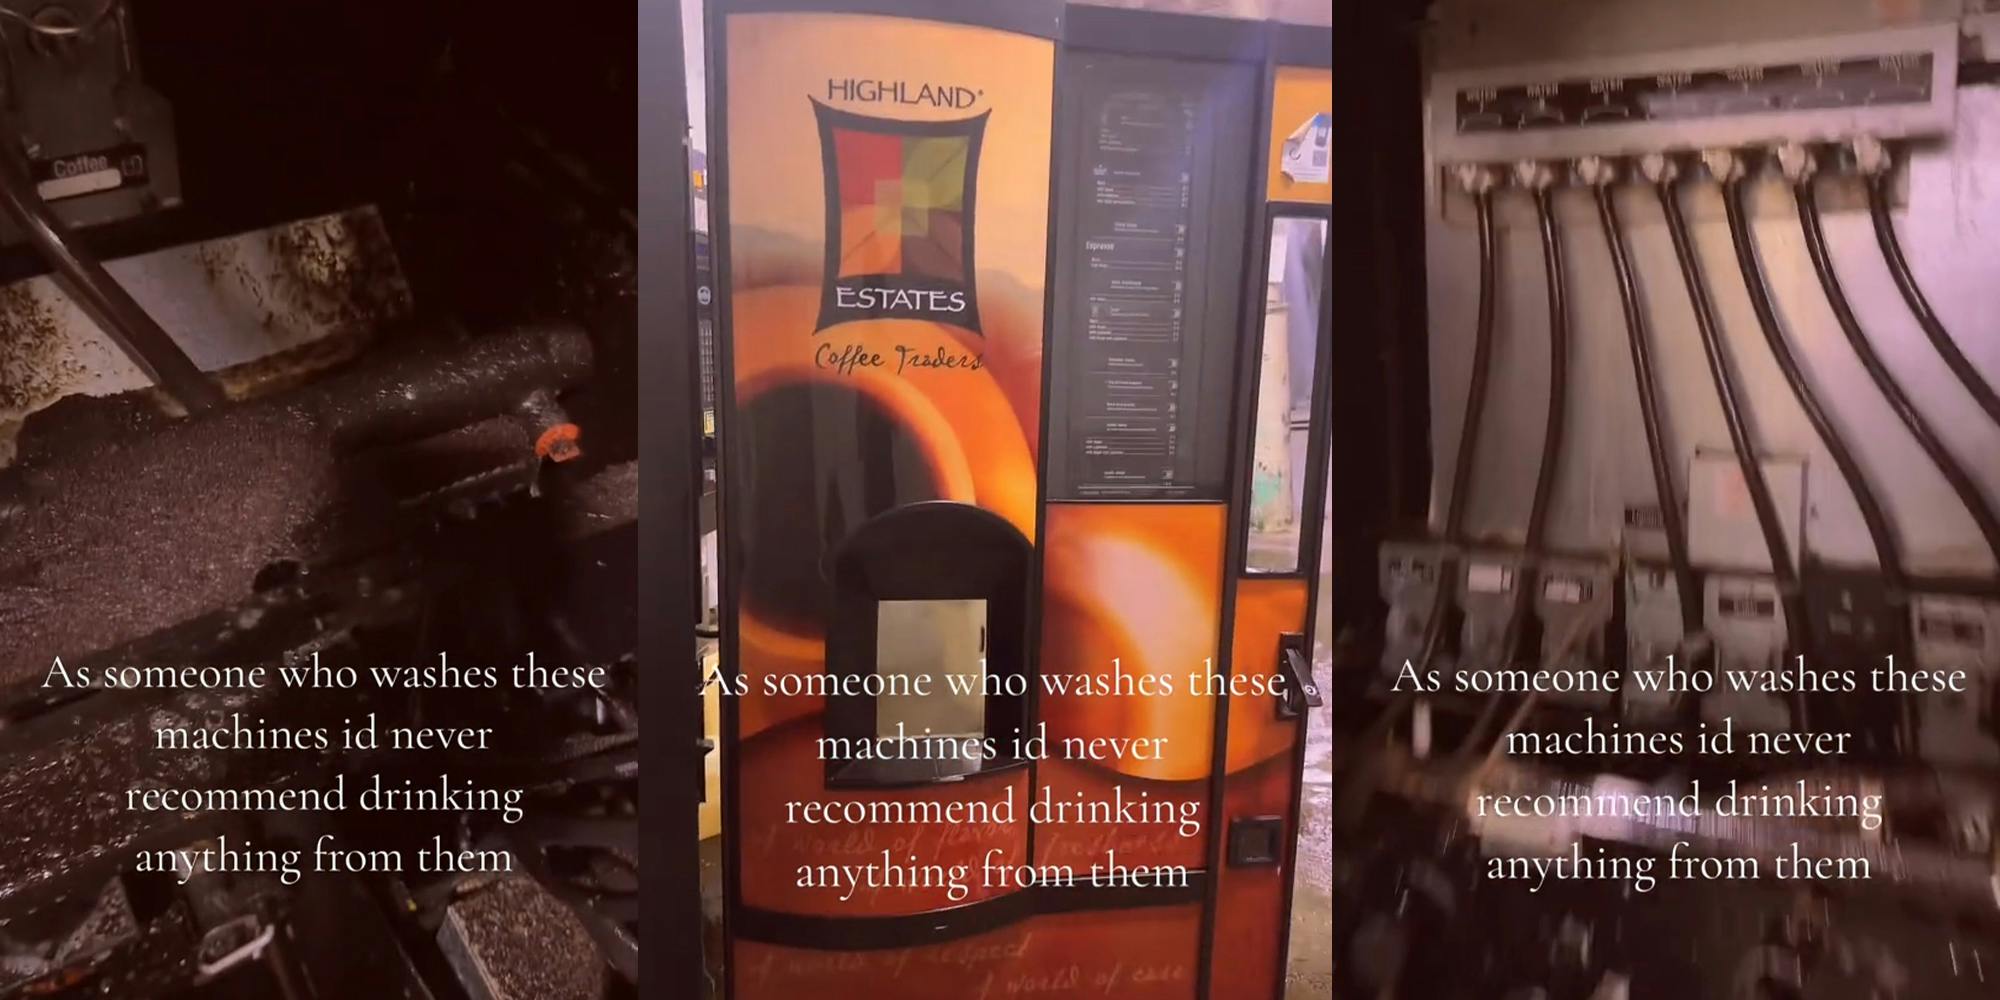 Worker warns against drinking coffee from coffee vending machines